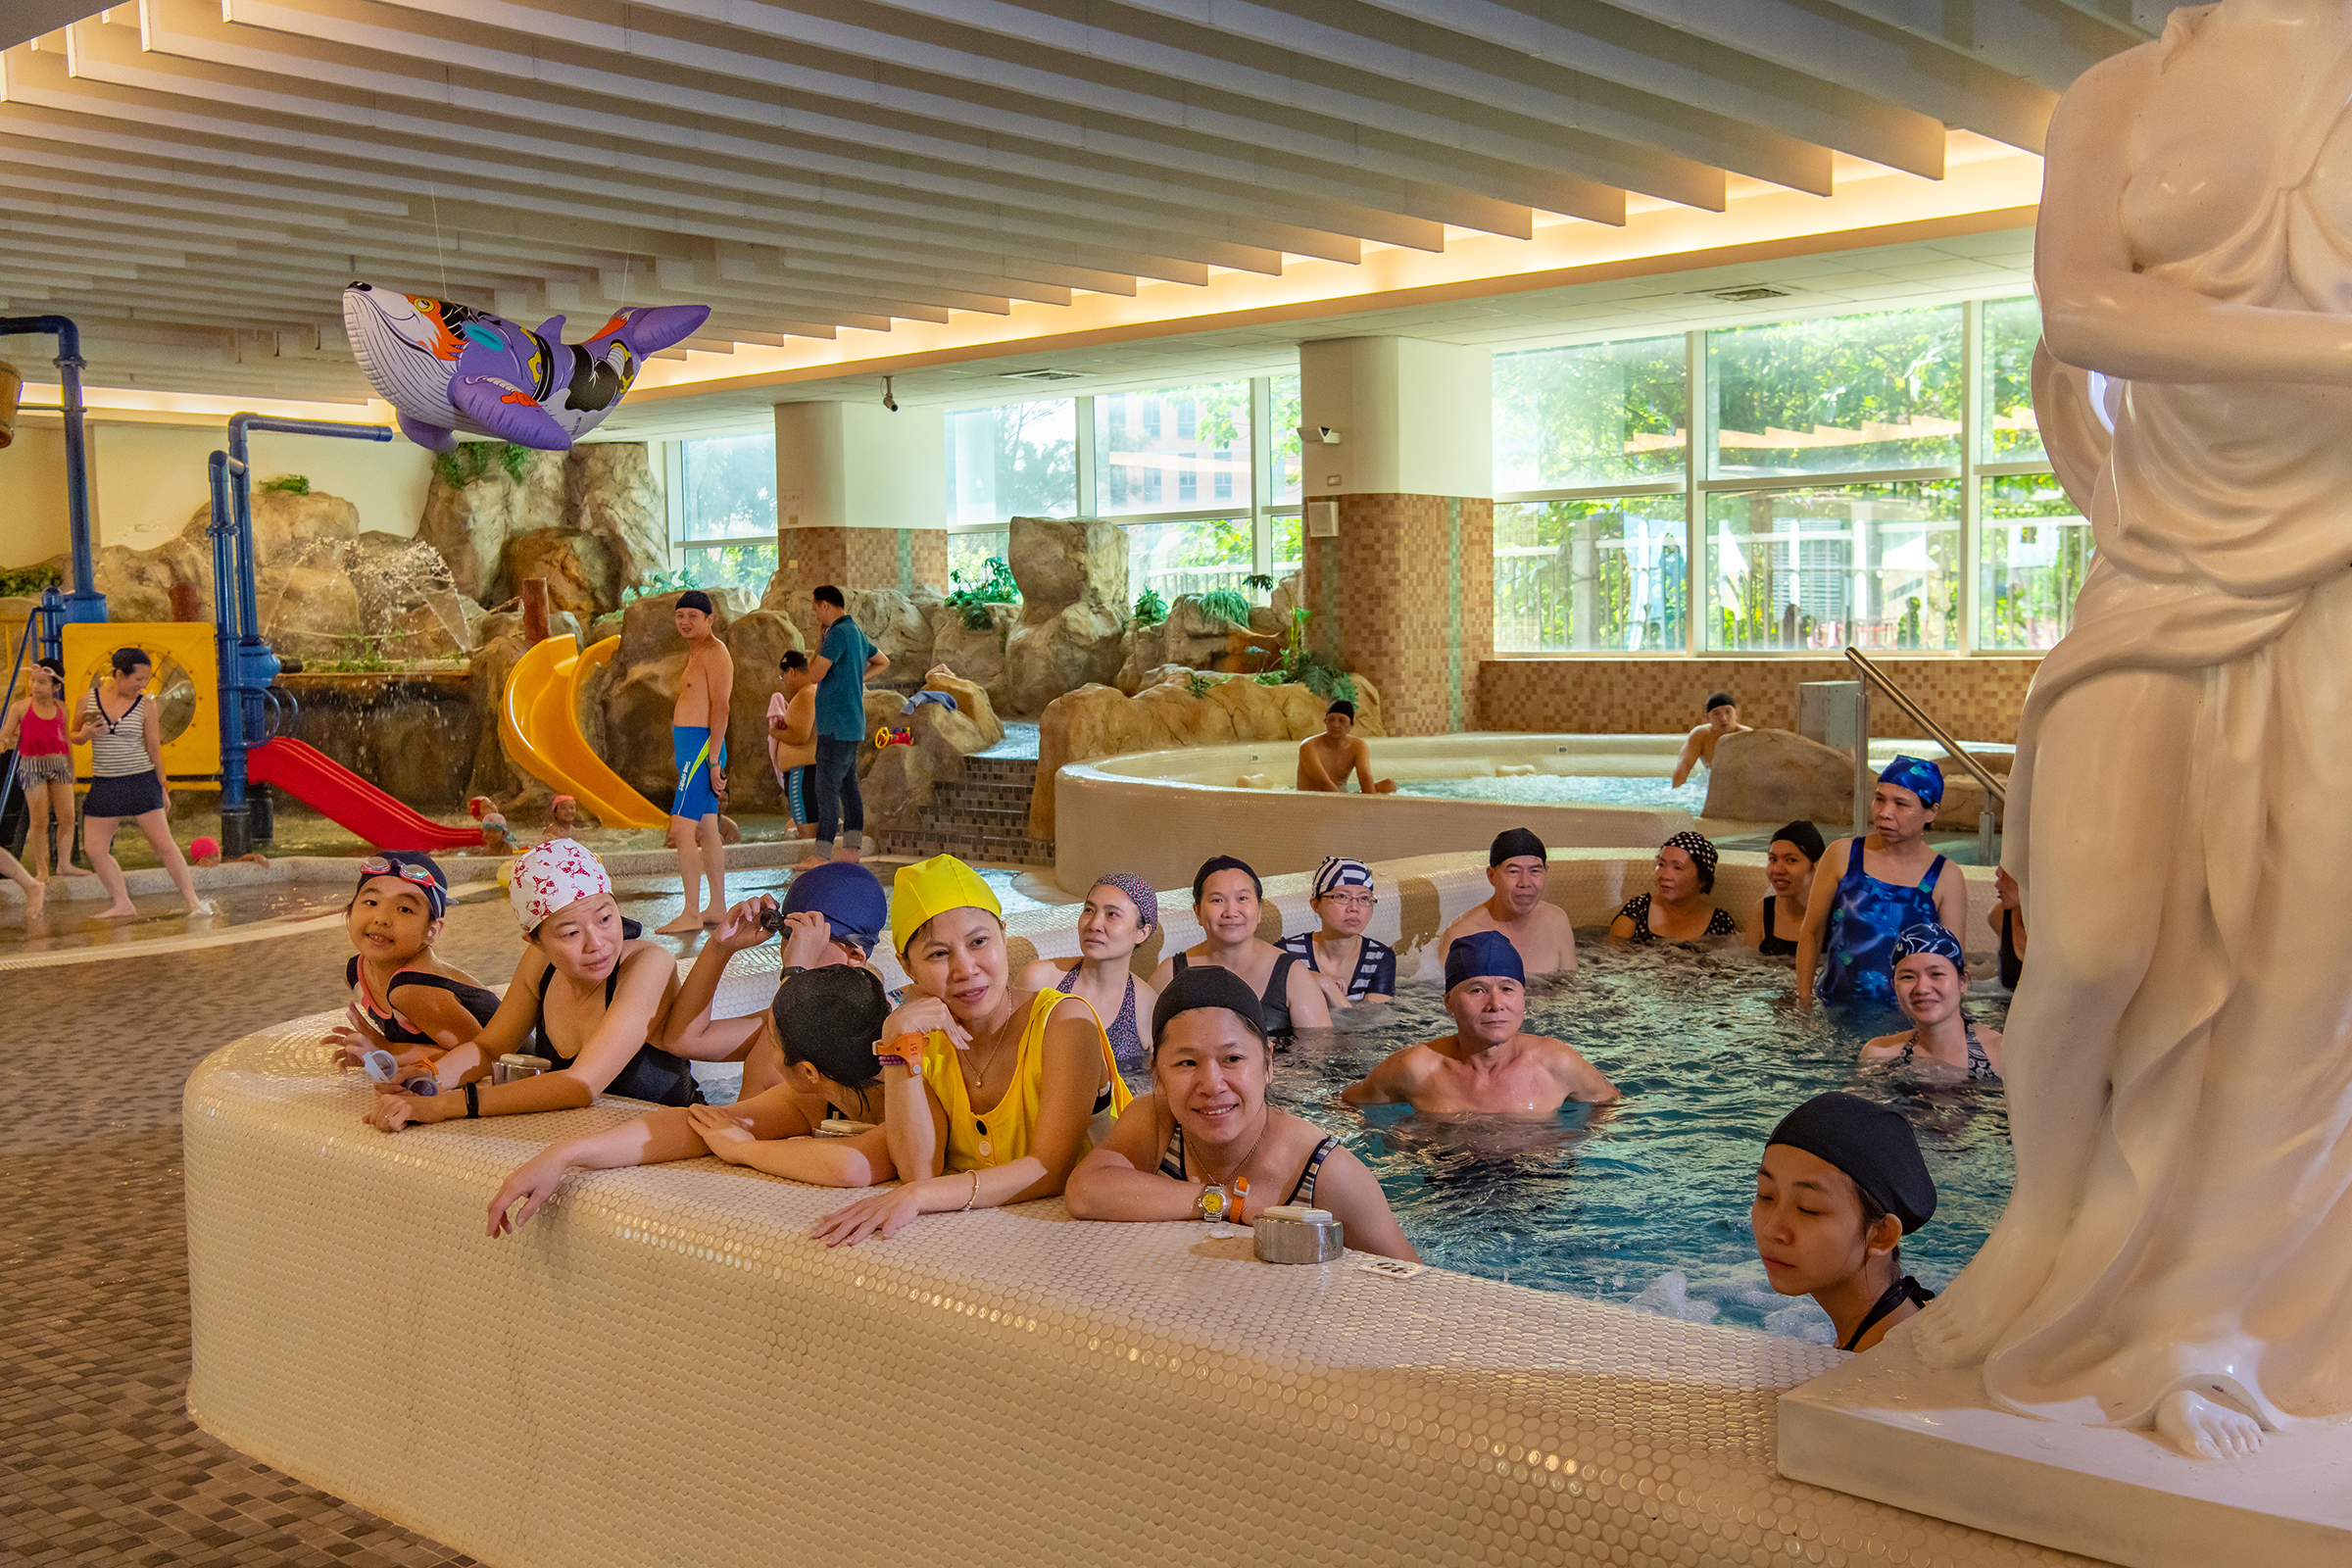 Supporters at a swimming pool wait for the President's arrival during a visit on Oct. 5.